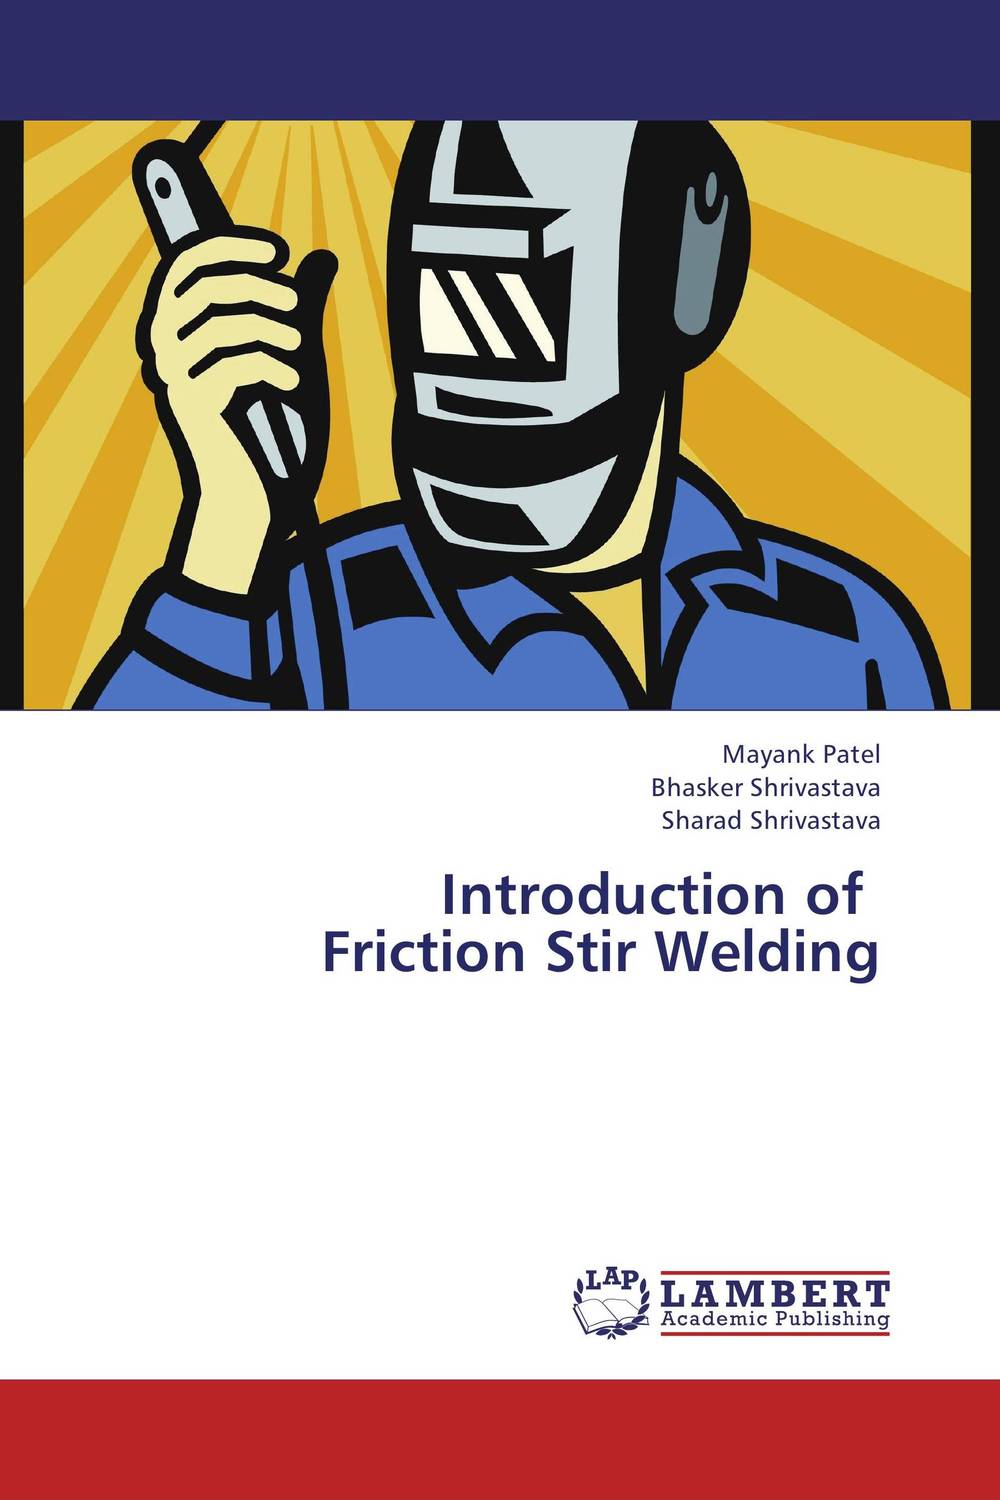 Introduction of Friction Stir Welding